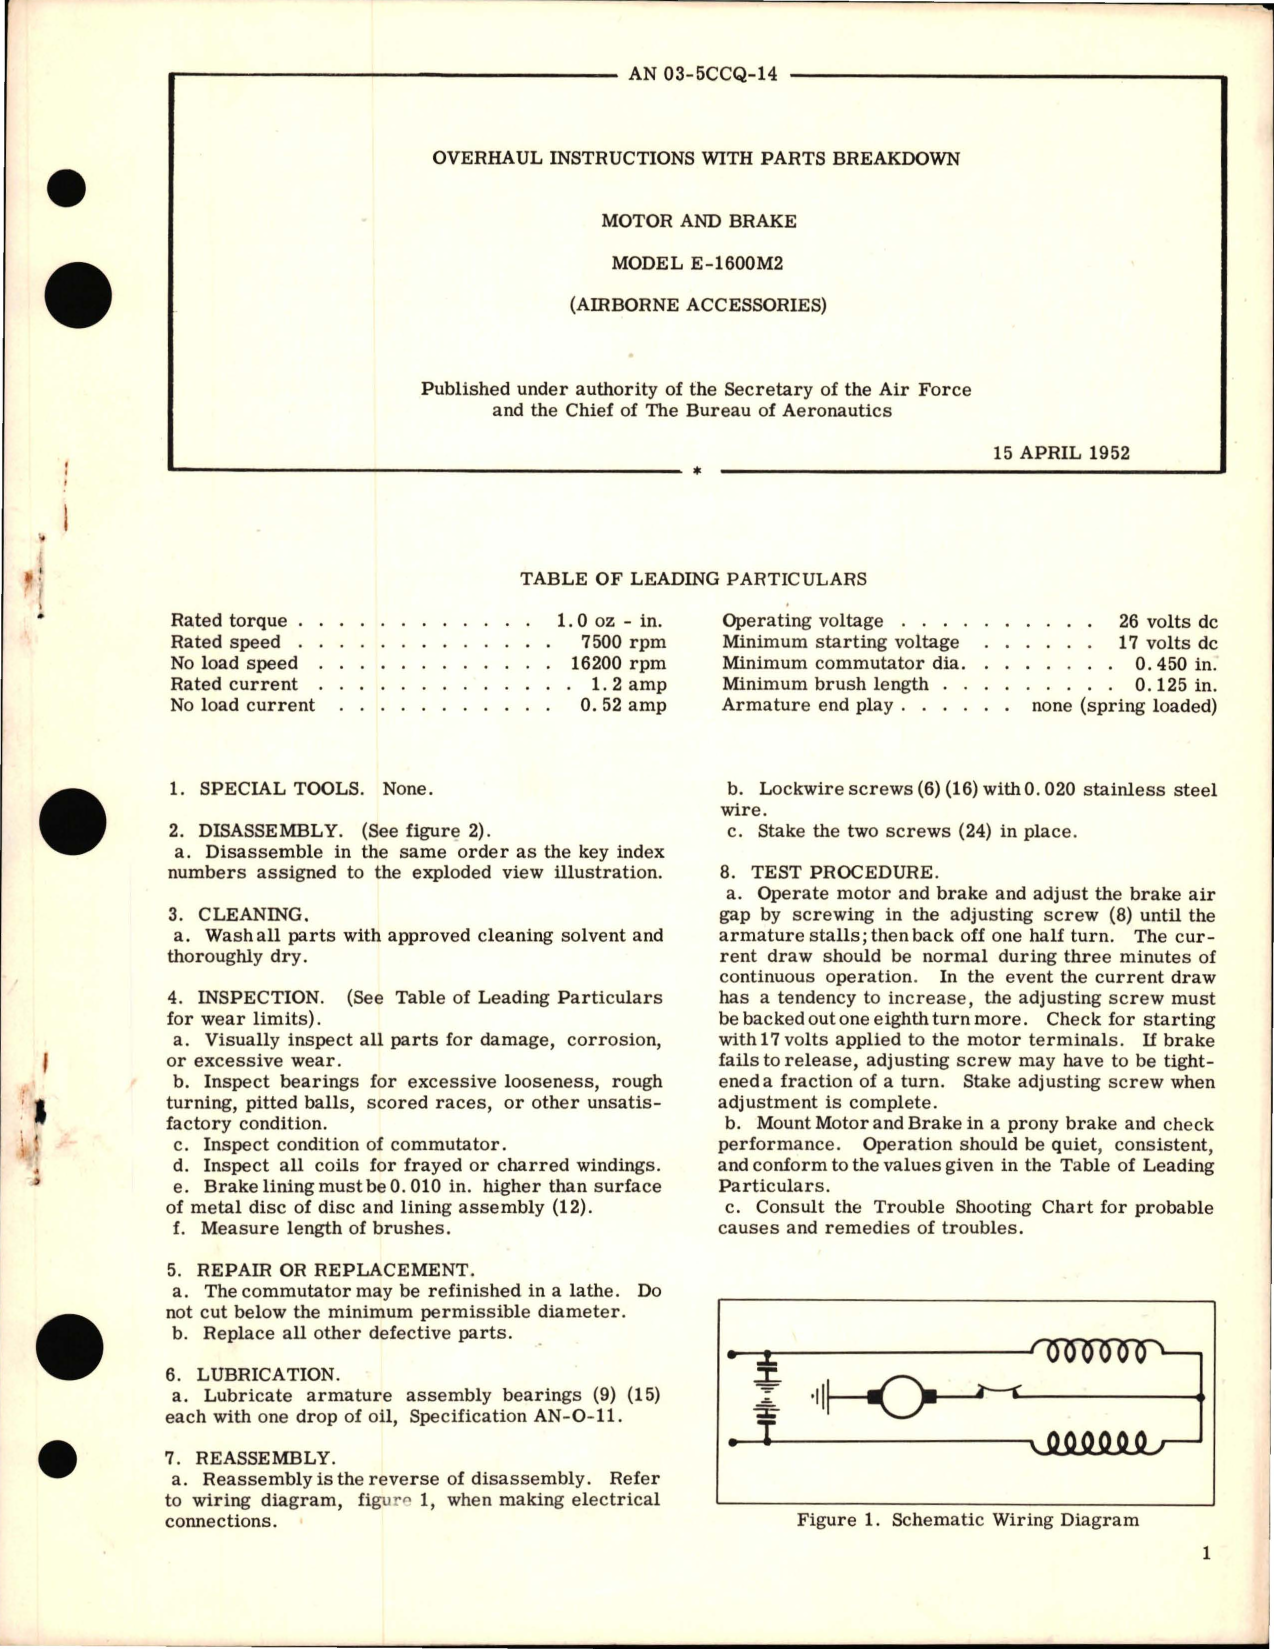 Sample page 1 from AirCorps Library document: Overhaul Instructions with Parts Breakdown for Motor and Brake - Model E-1600M2